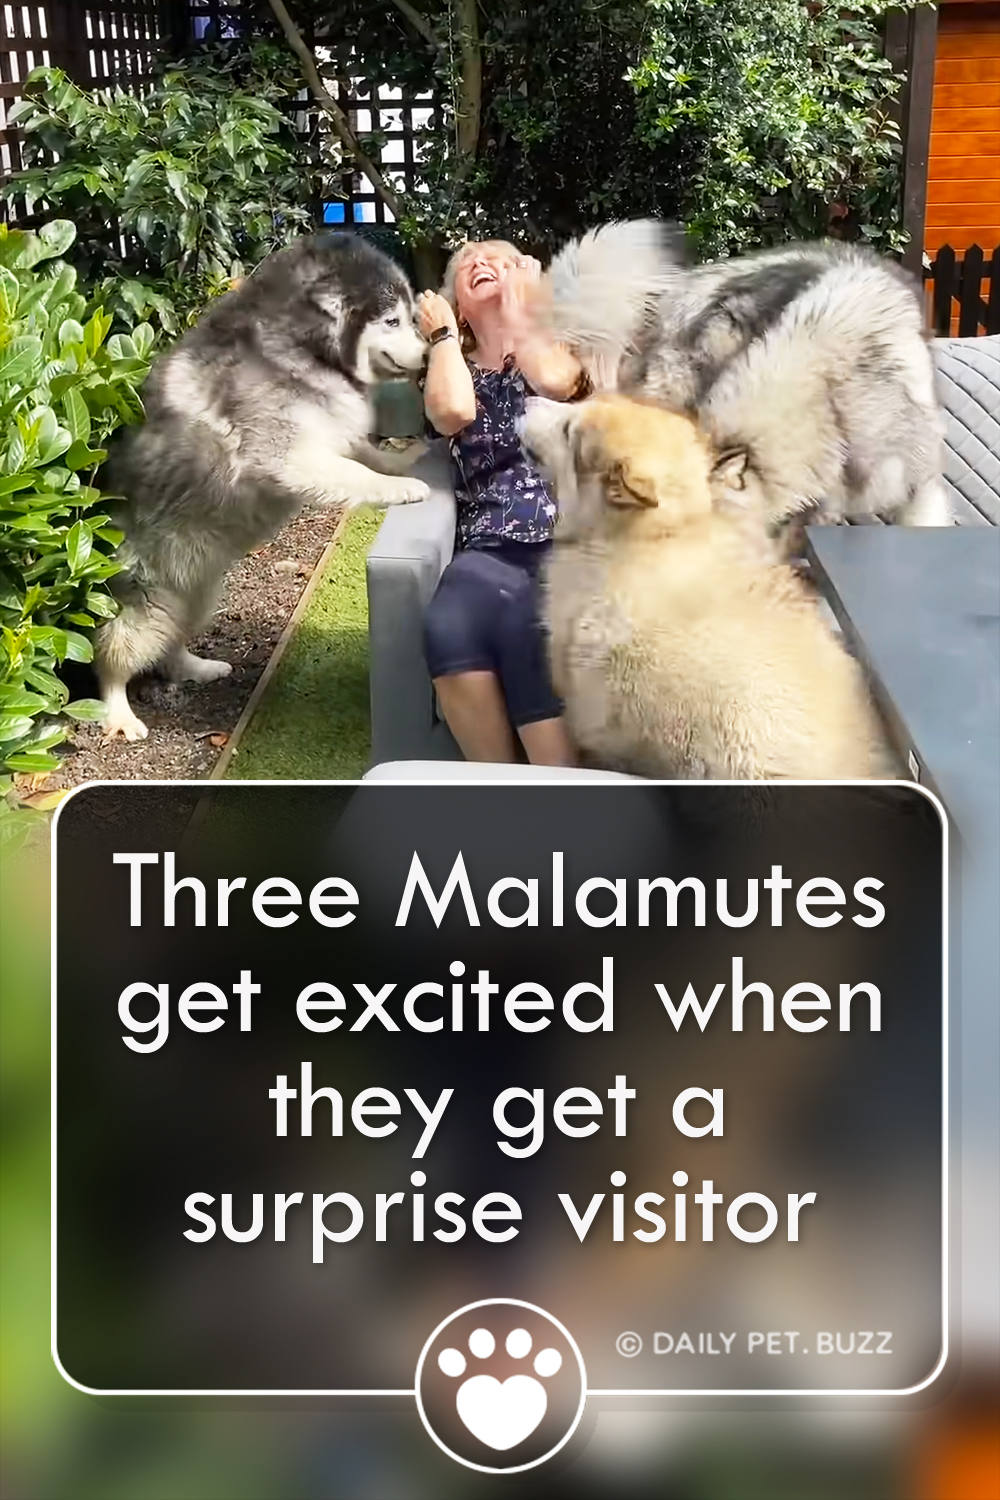 Three Malamutes get excited when they get a surprise visitor